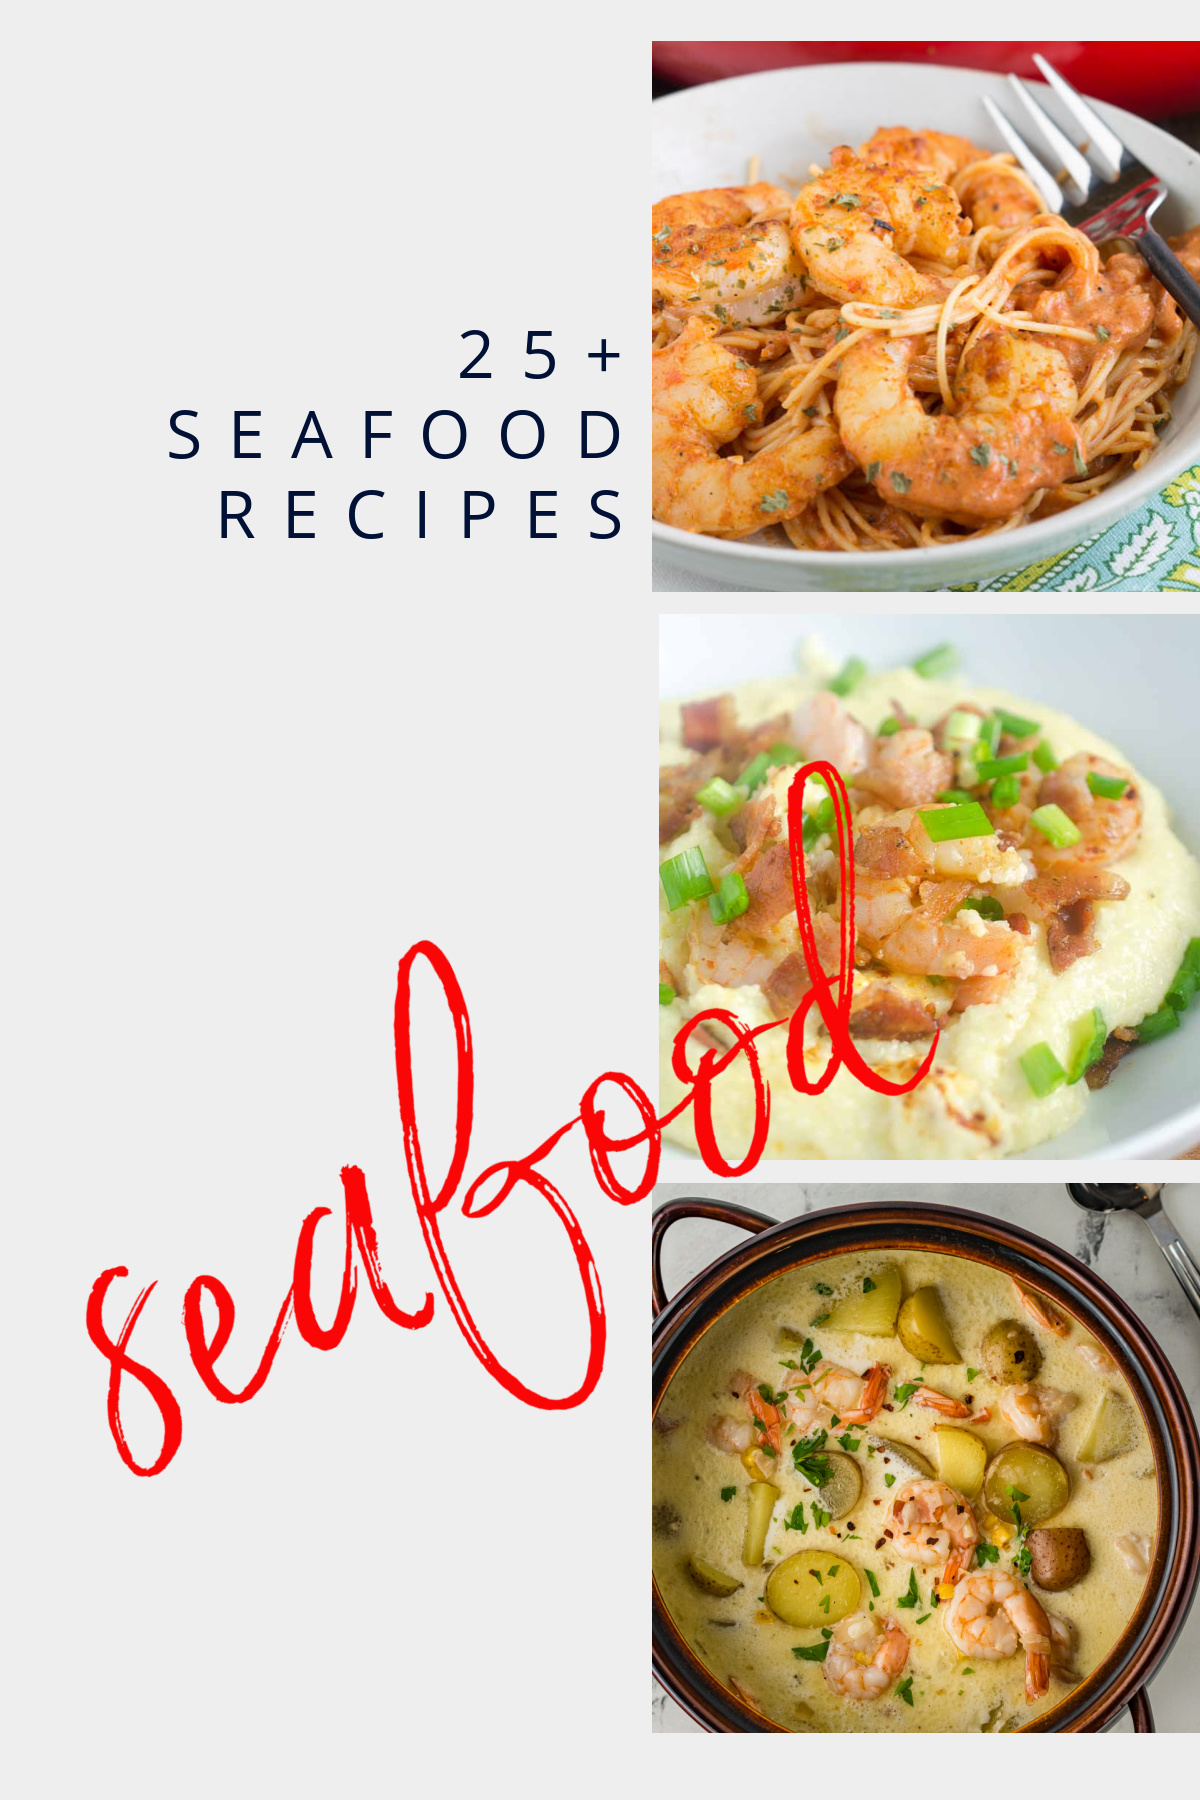 Seafood Recipes and Gulf County, Florida with long stretches of white sand kissed by emerald waters & the best seafood anywhere.